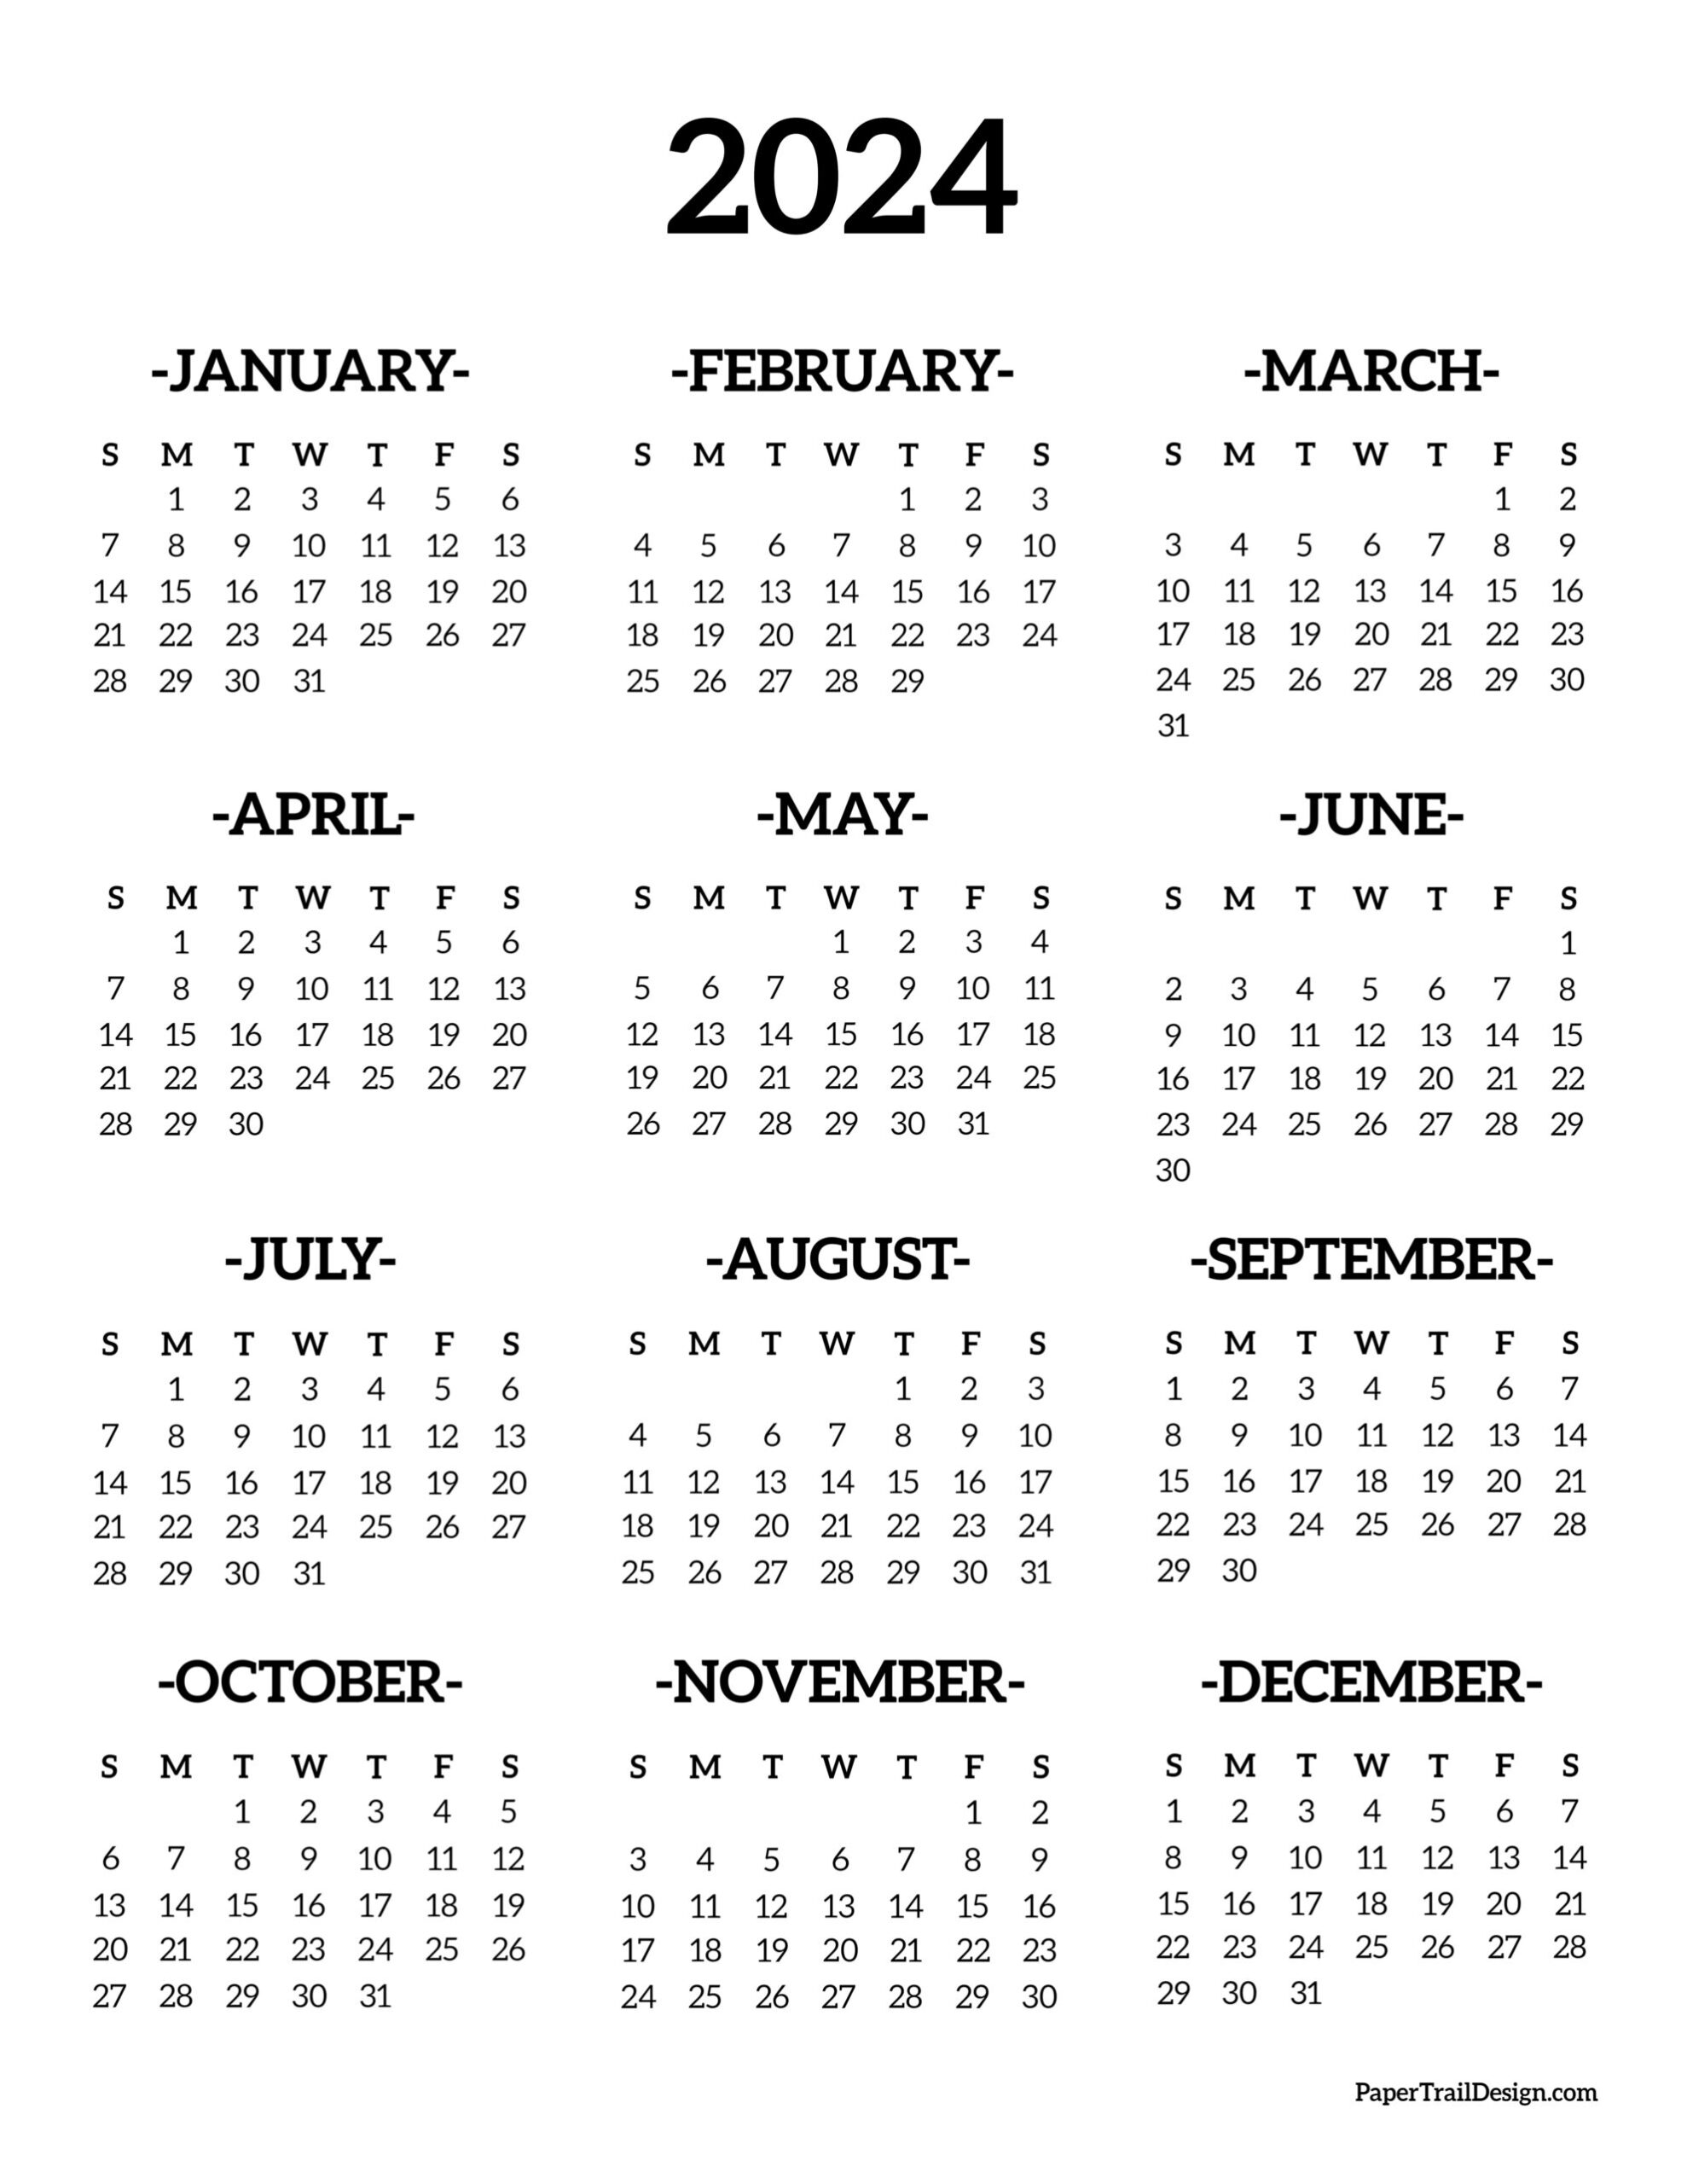 Calendar 2024 Printable One Page - Paper Trail Design for 2024 Year Calendar Printable One Page